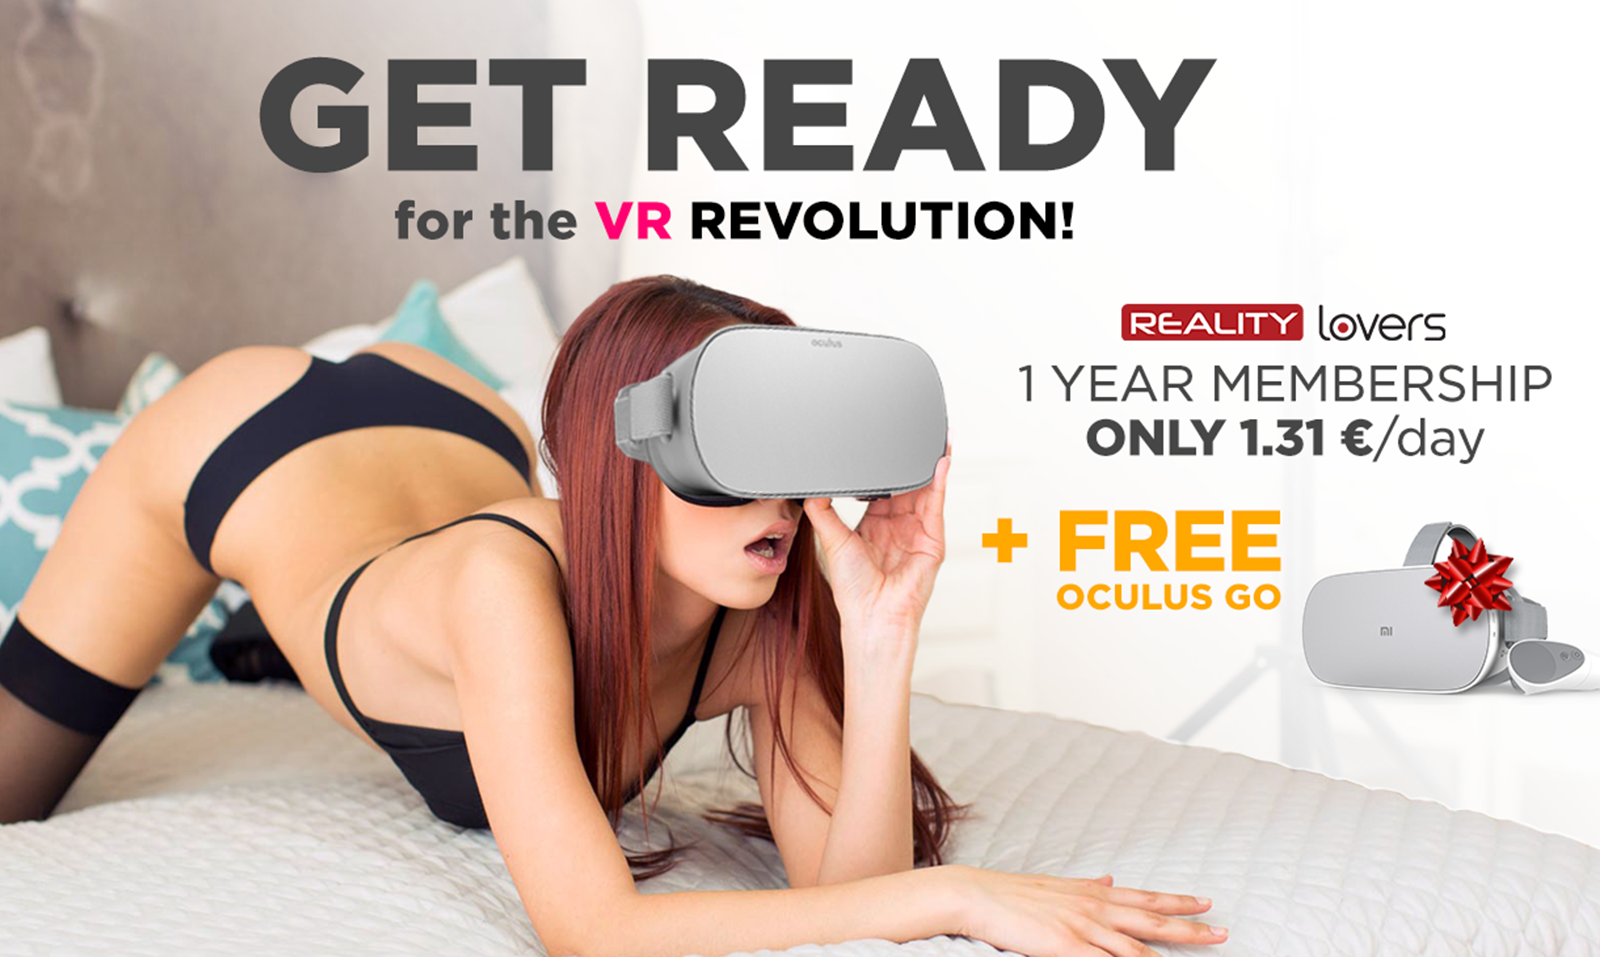 Reality Lovers VR Special Deal Includes Oculus VR Headset